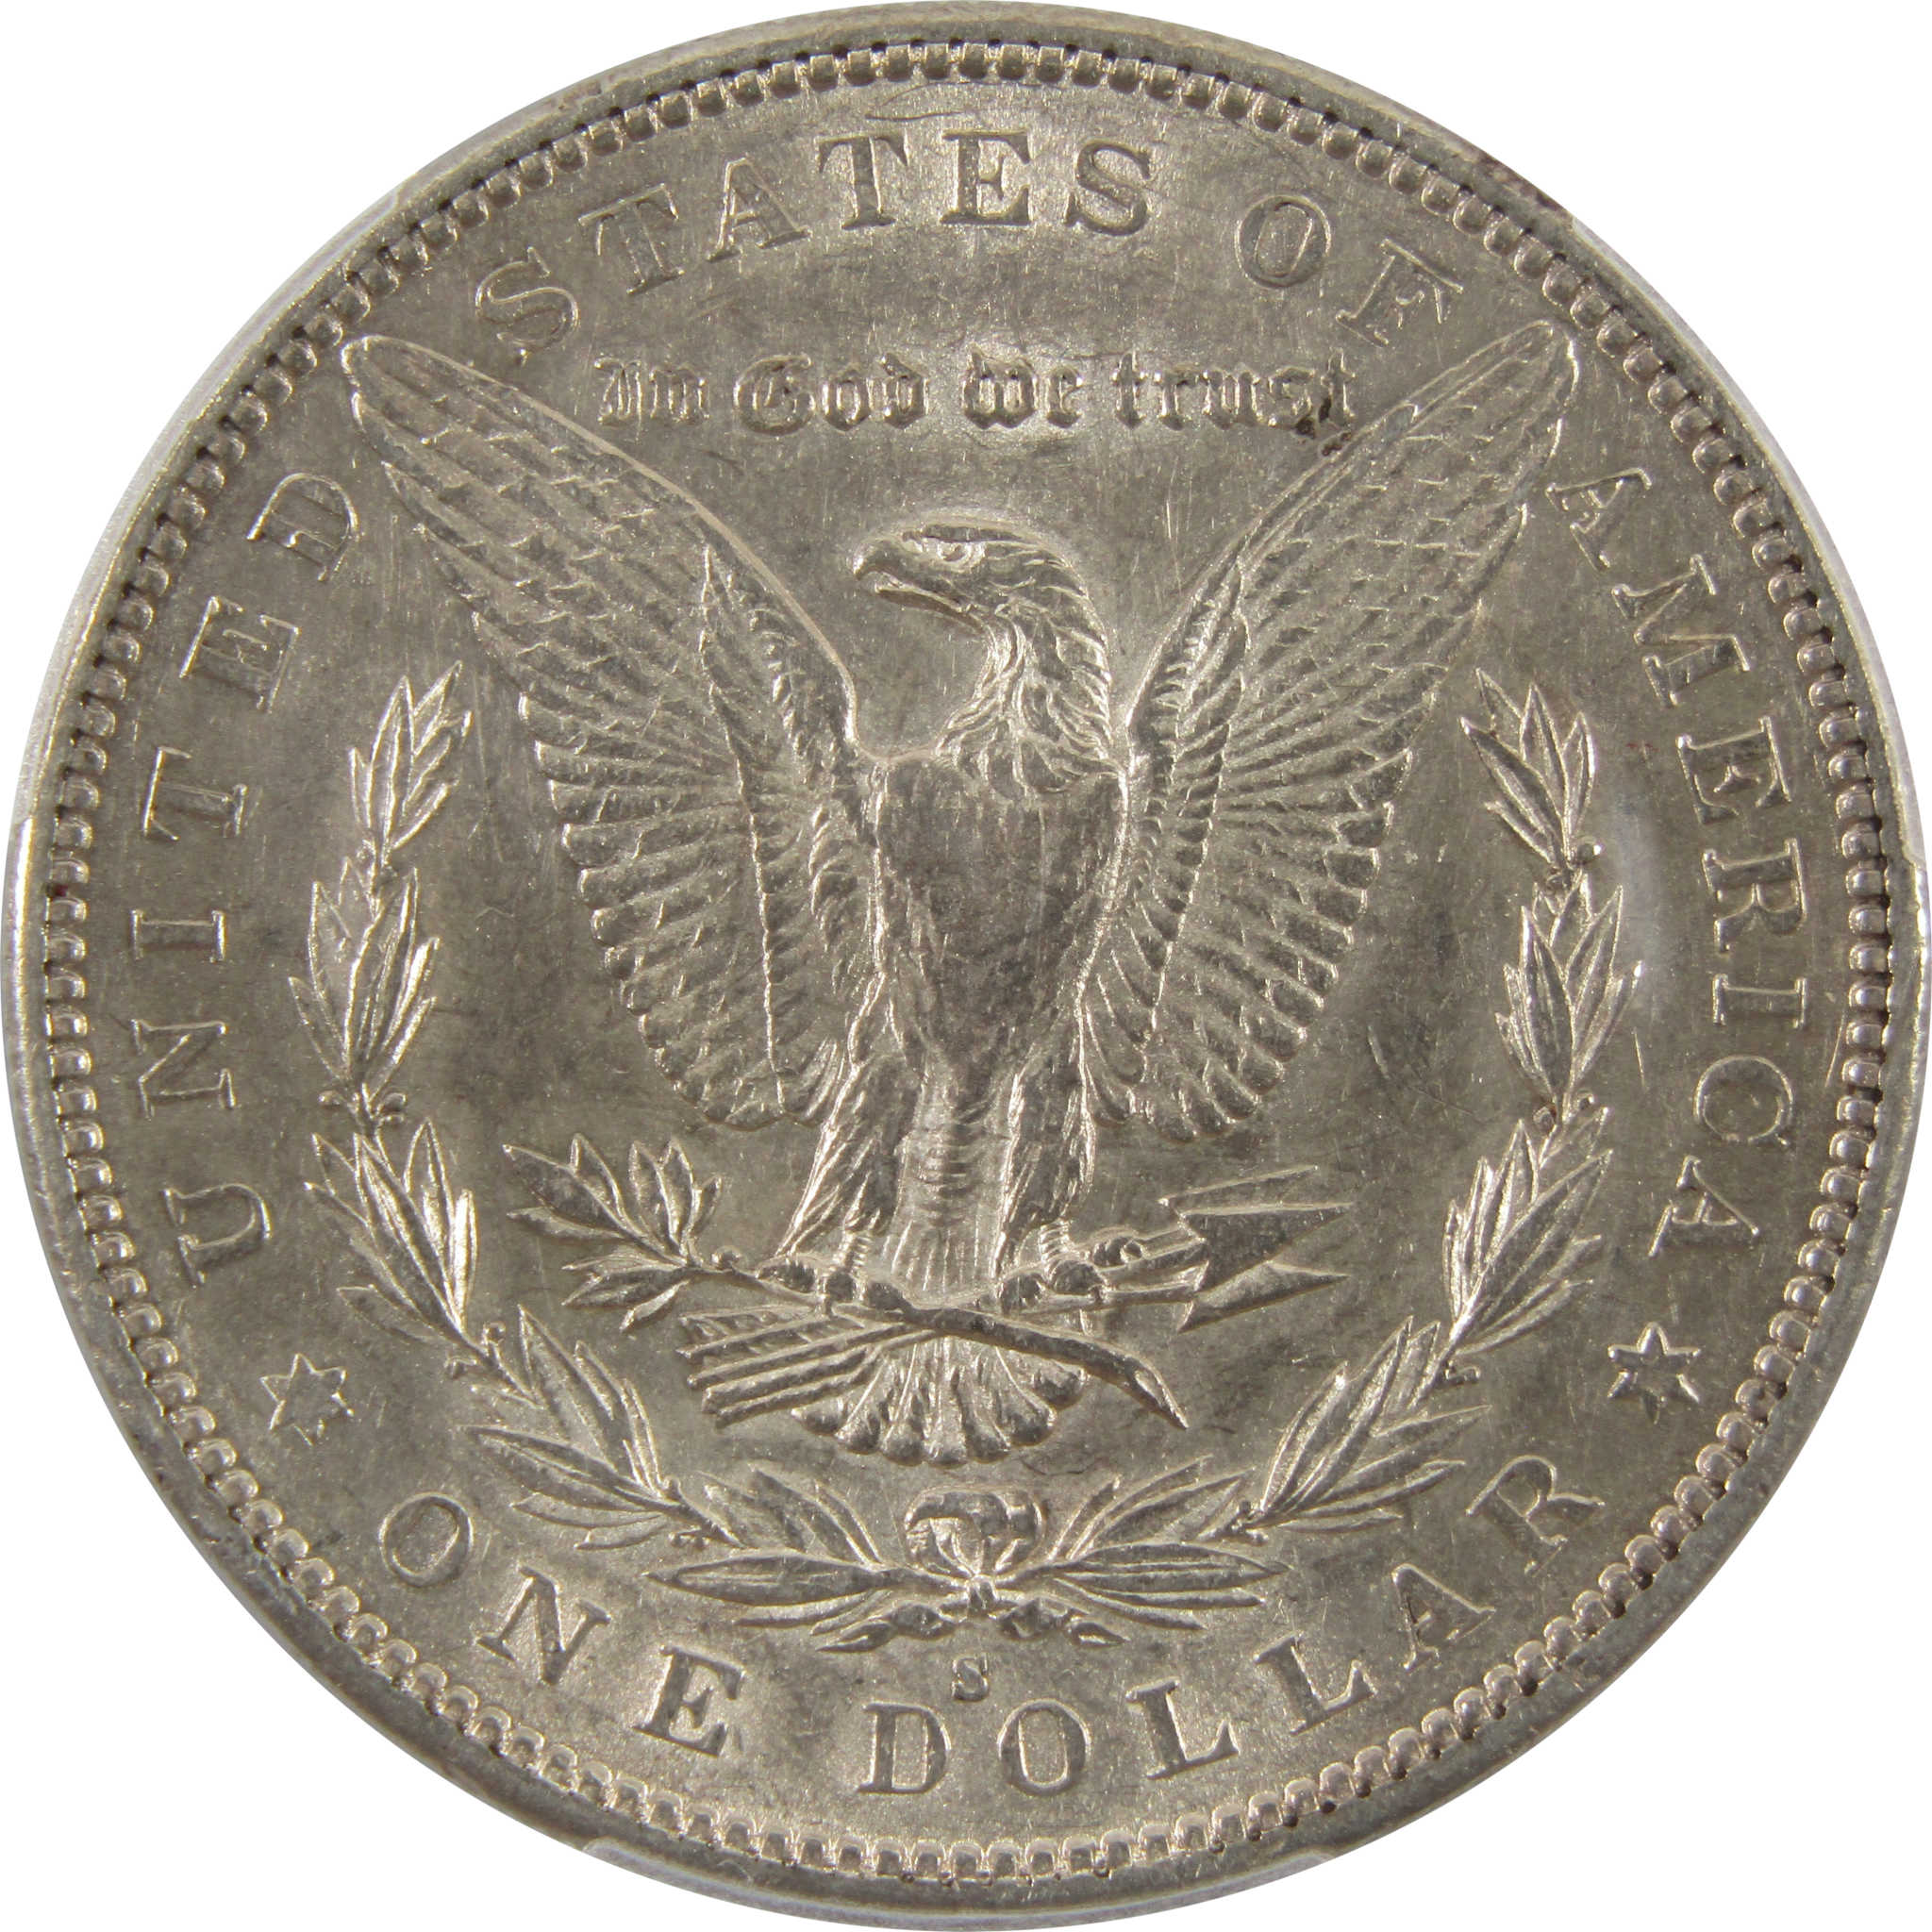 1883 S Morgan Dollar XF 45 PCGS 90% Silver $1 Coin SKU:I10703 - Morgan coin - Morgan silver dollar - Morgan silver dollar for sale - Profile Coins &amp; Collectibles